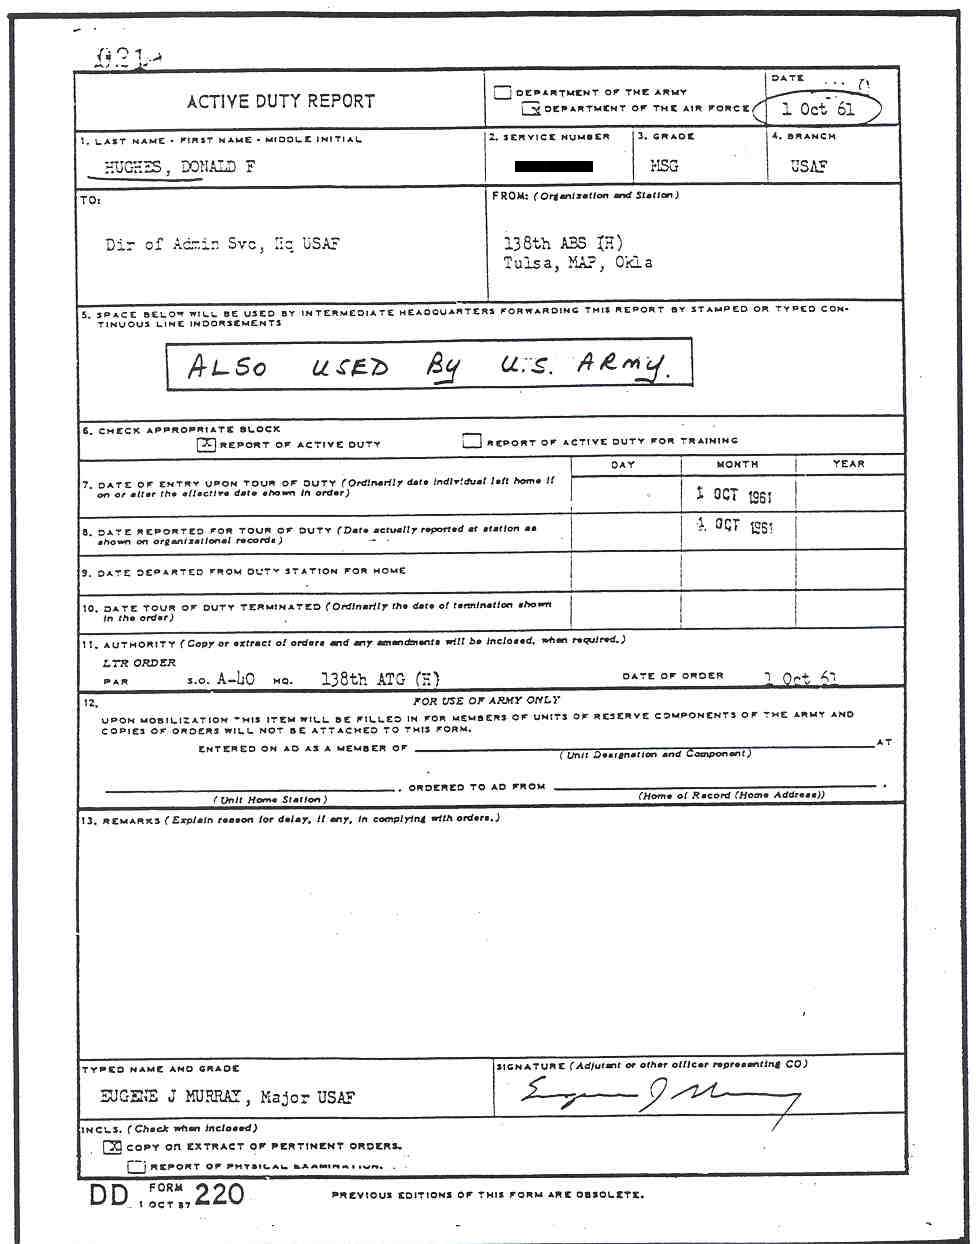 DD Form 220 Active Duty Report